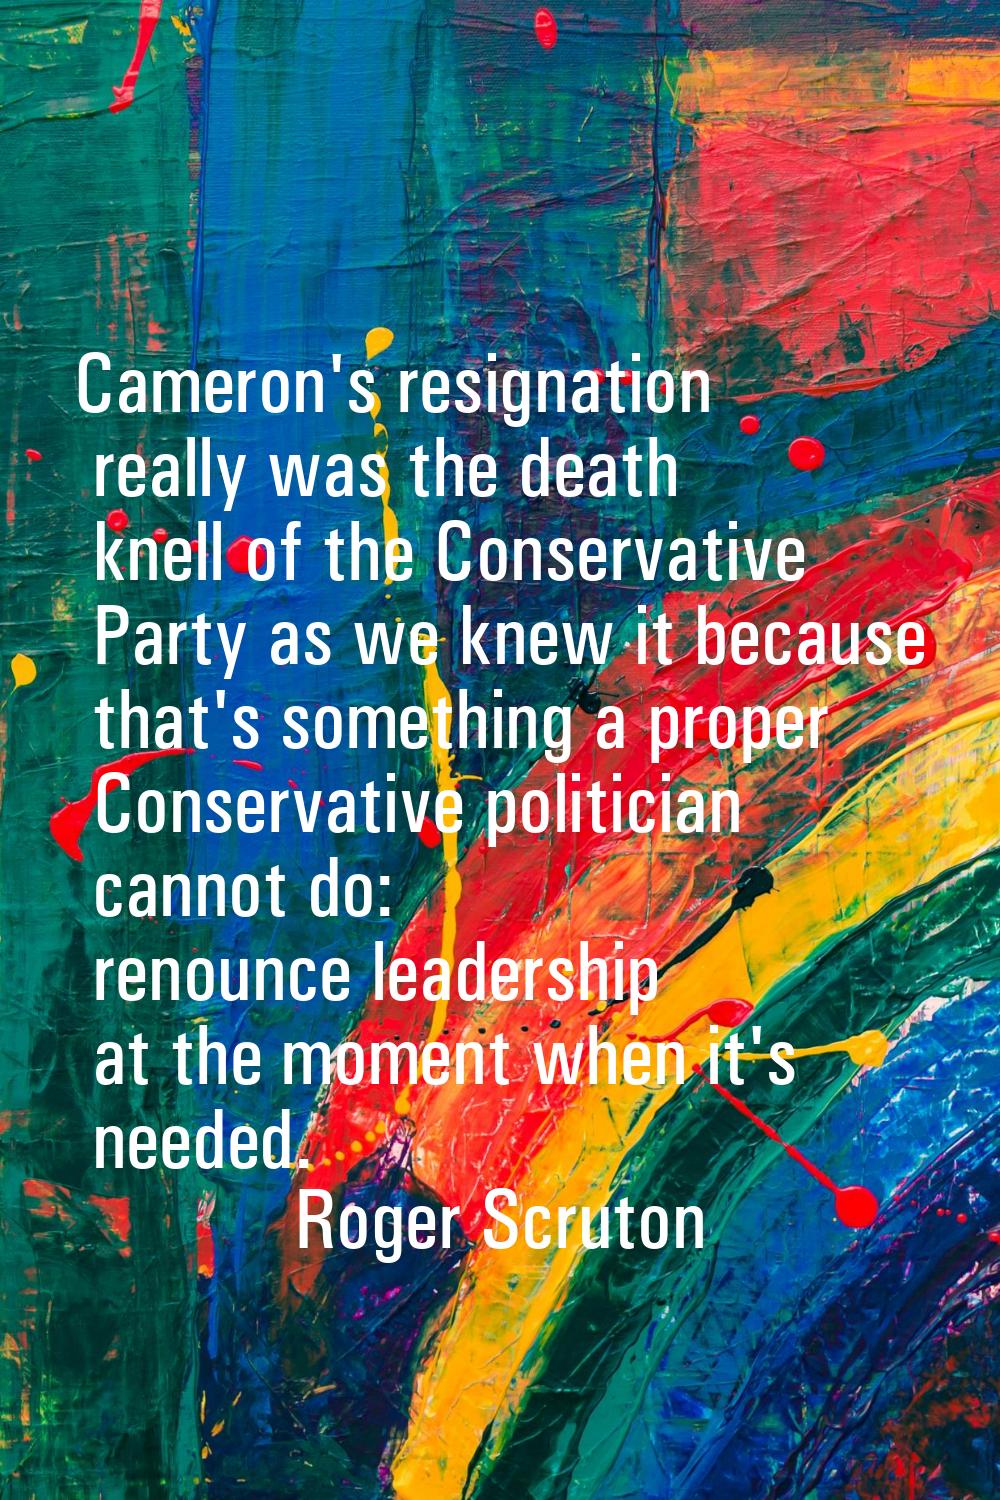 Cameron's resignation really was the death knell of the Conservative Party as we knew it because th